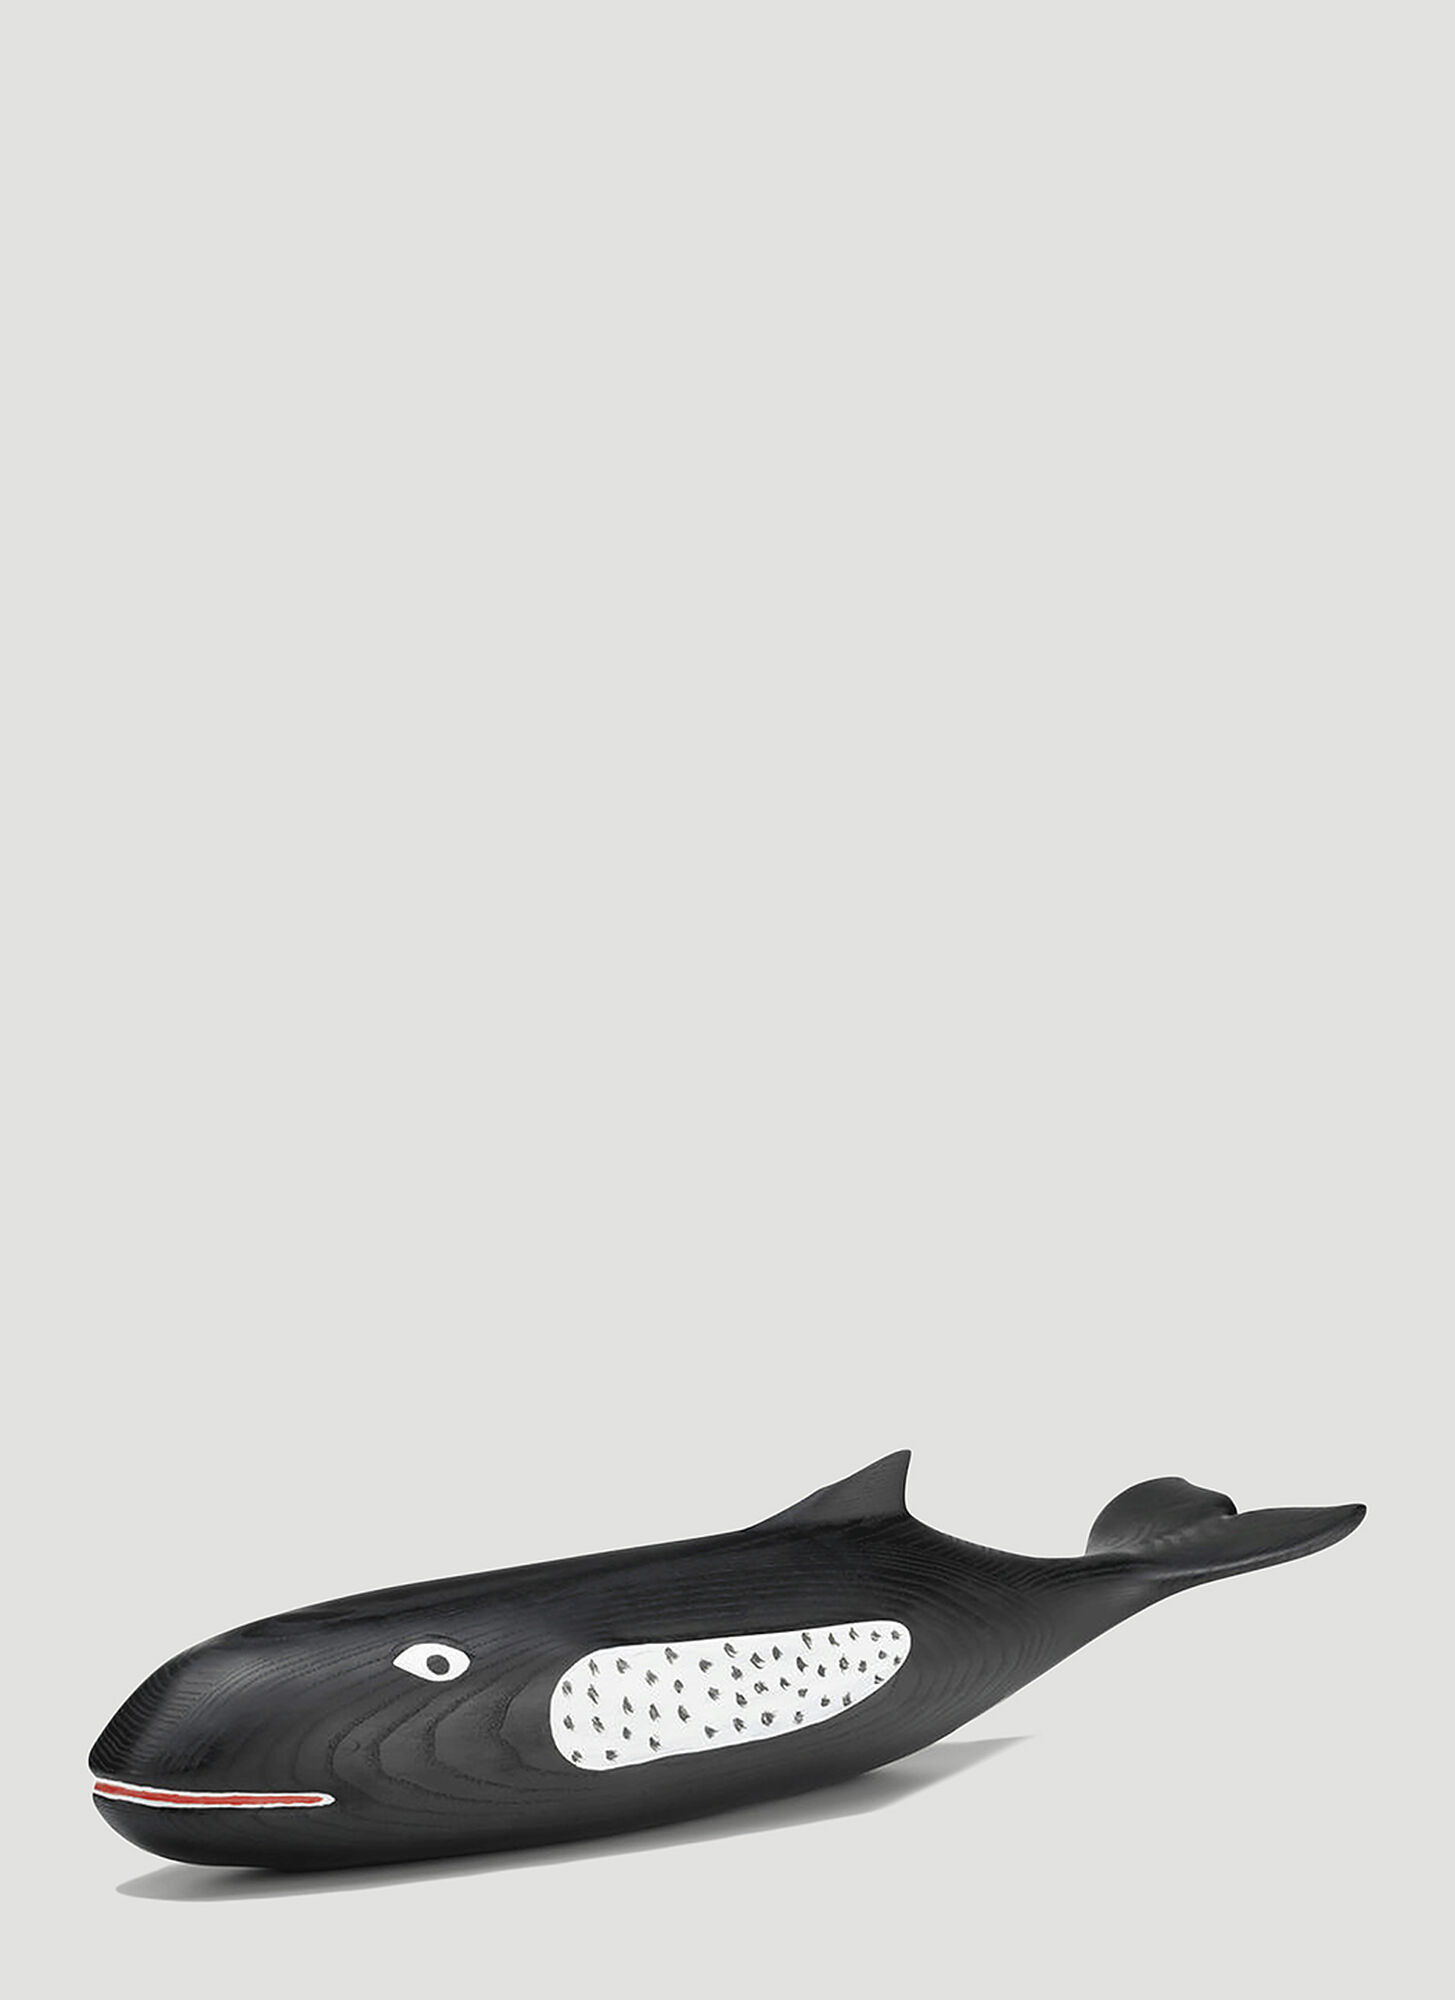 Vitra Eames House Whale In Black